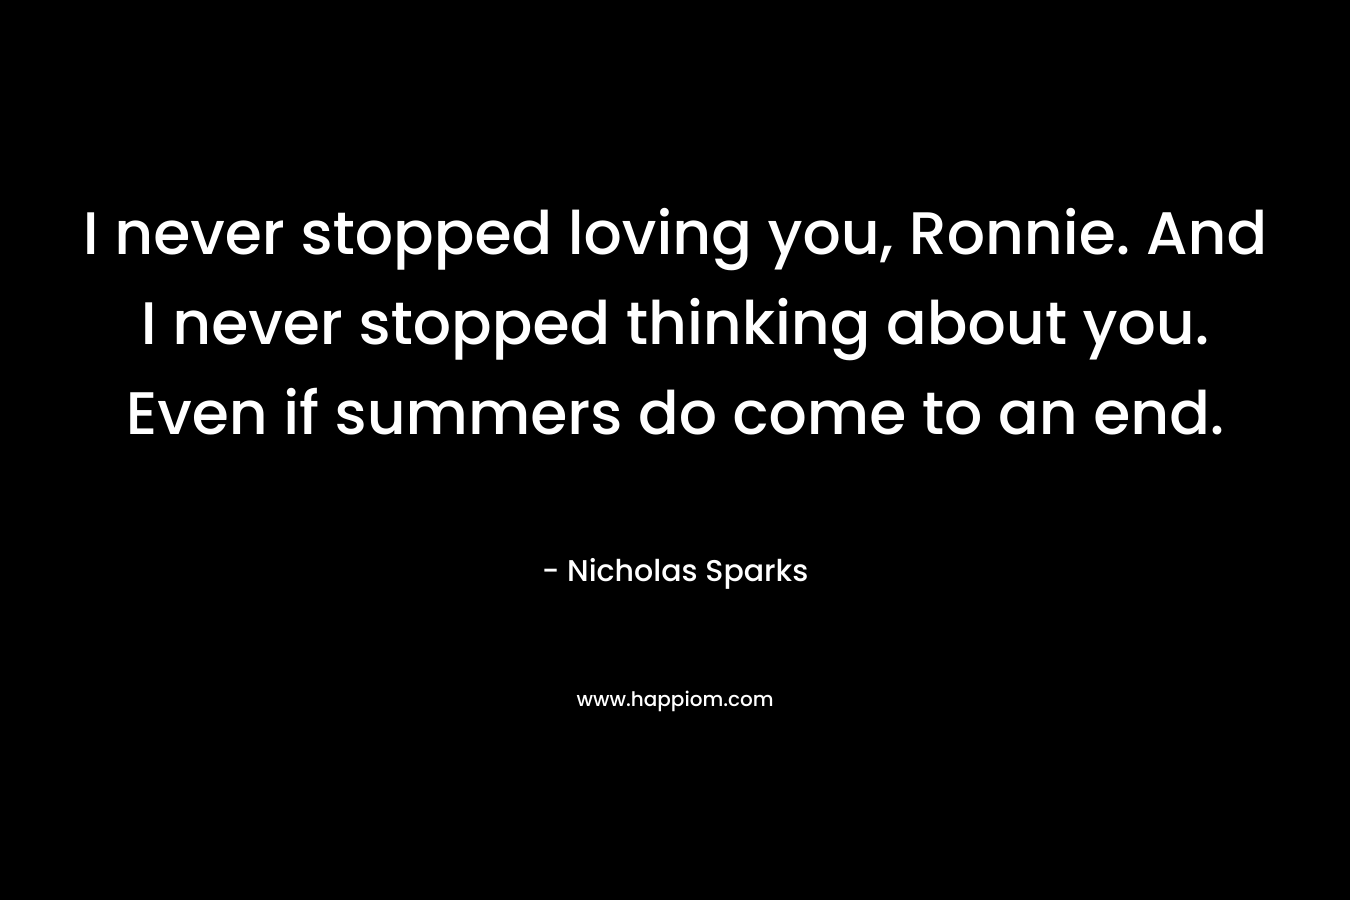 I never stopped loving you, Ronnie. And I never stopped thinking about you. Even if summers do come to an end.